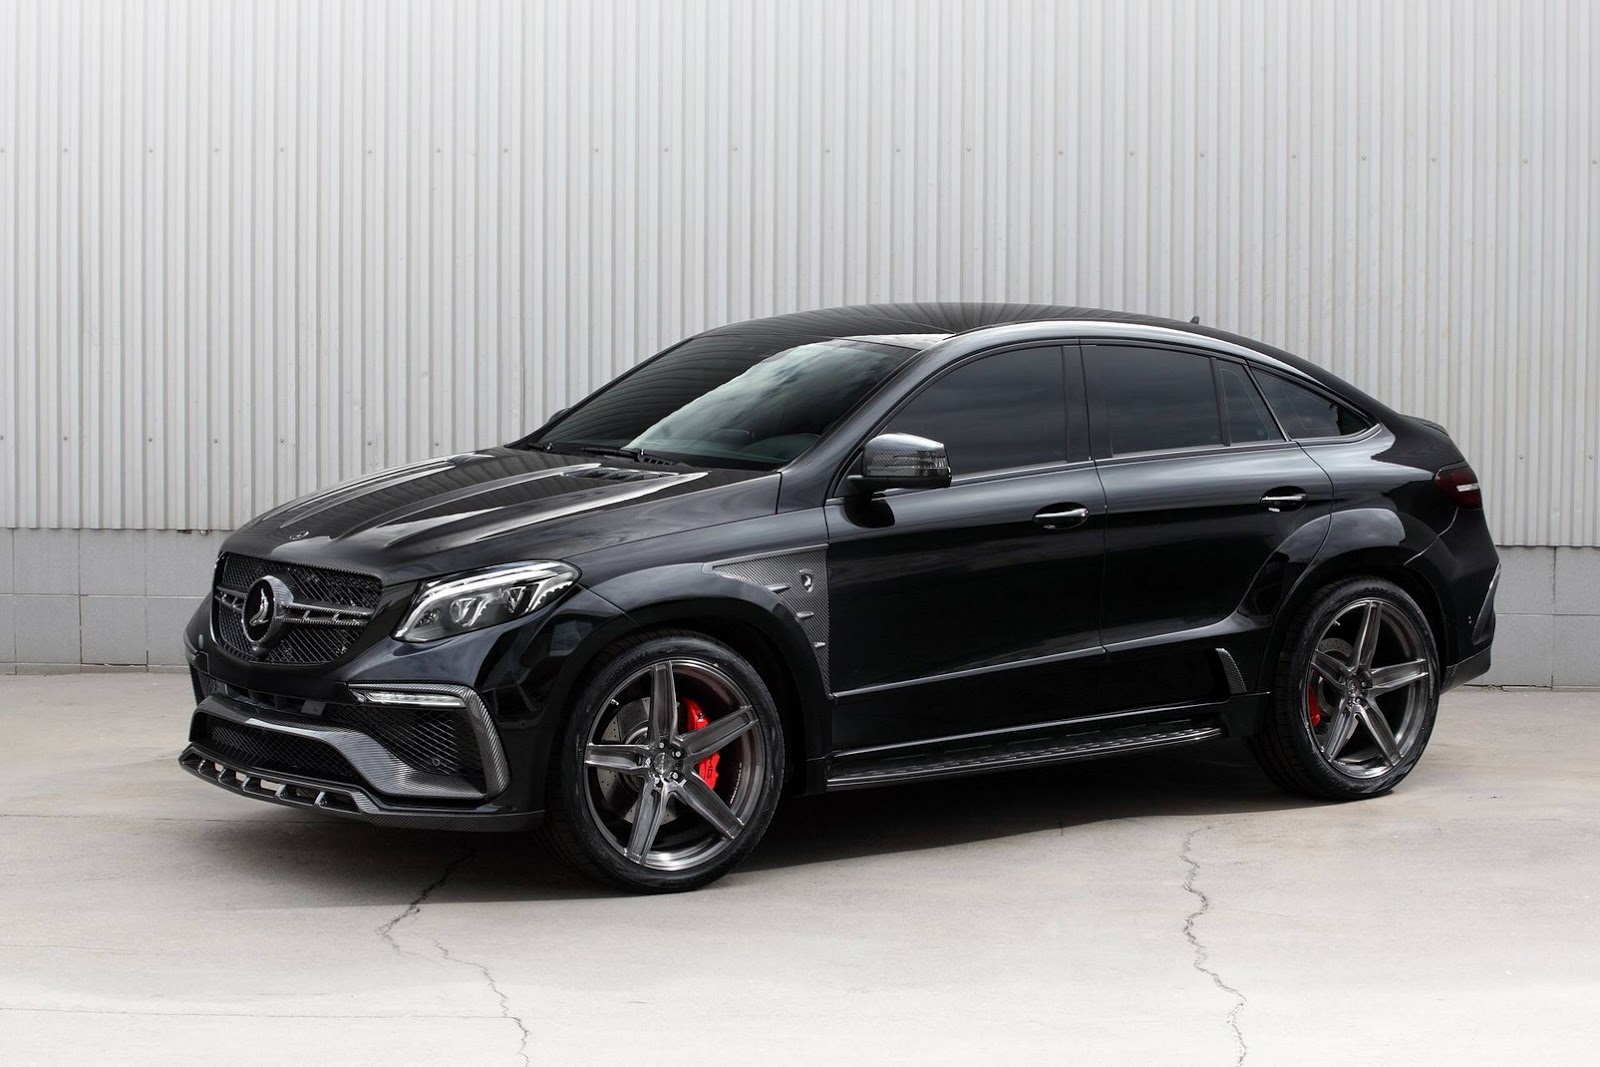 ... unveils “Inferno” tuning kit for Mercedes GLE and GLE 63 Coupe